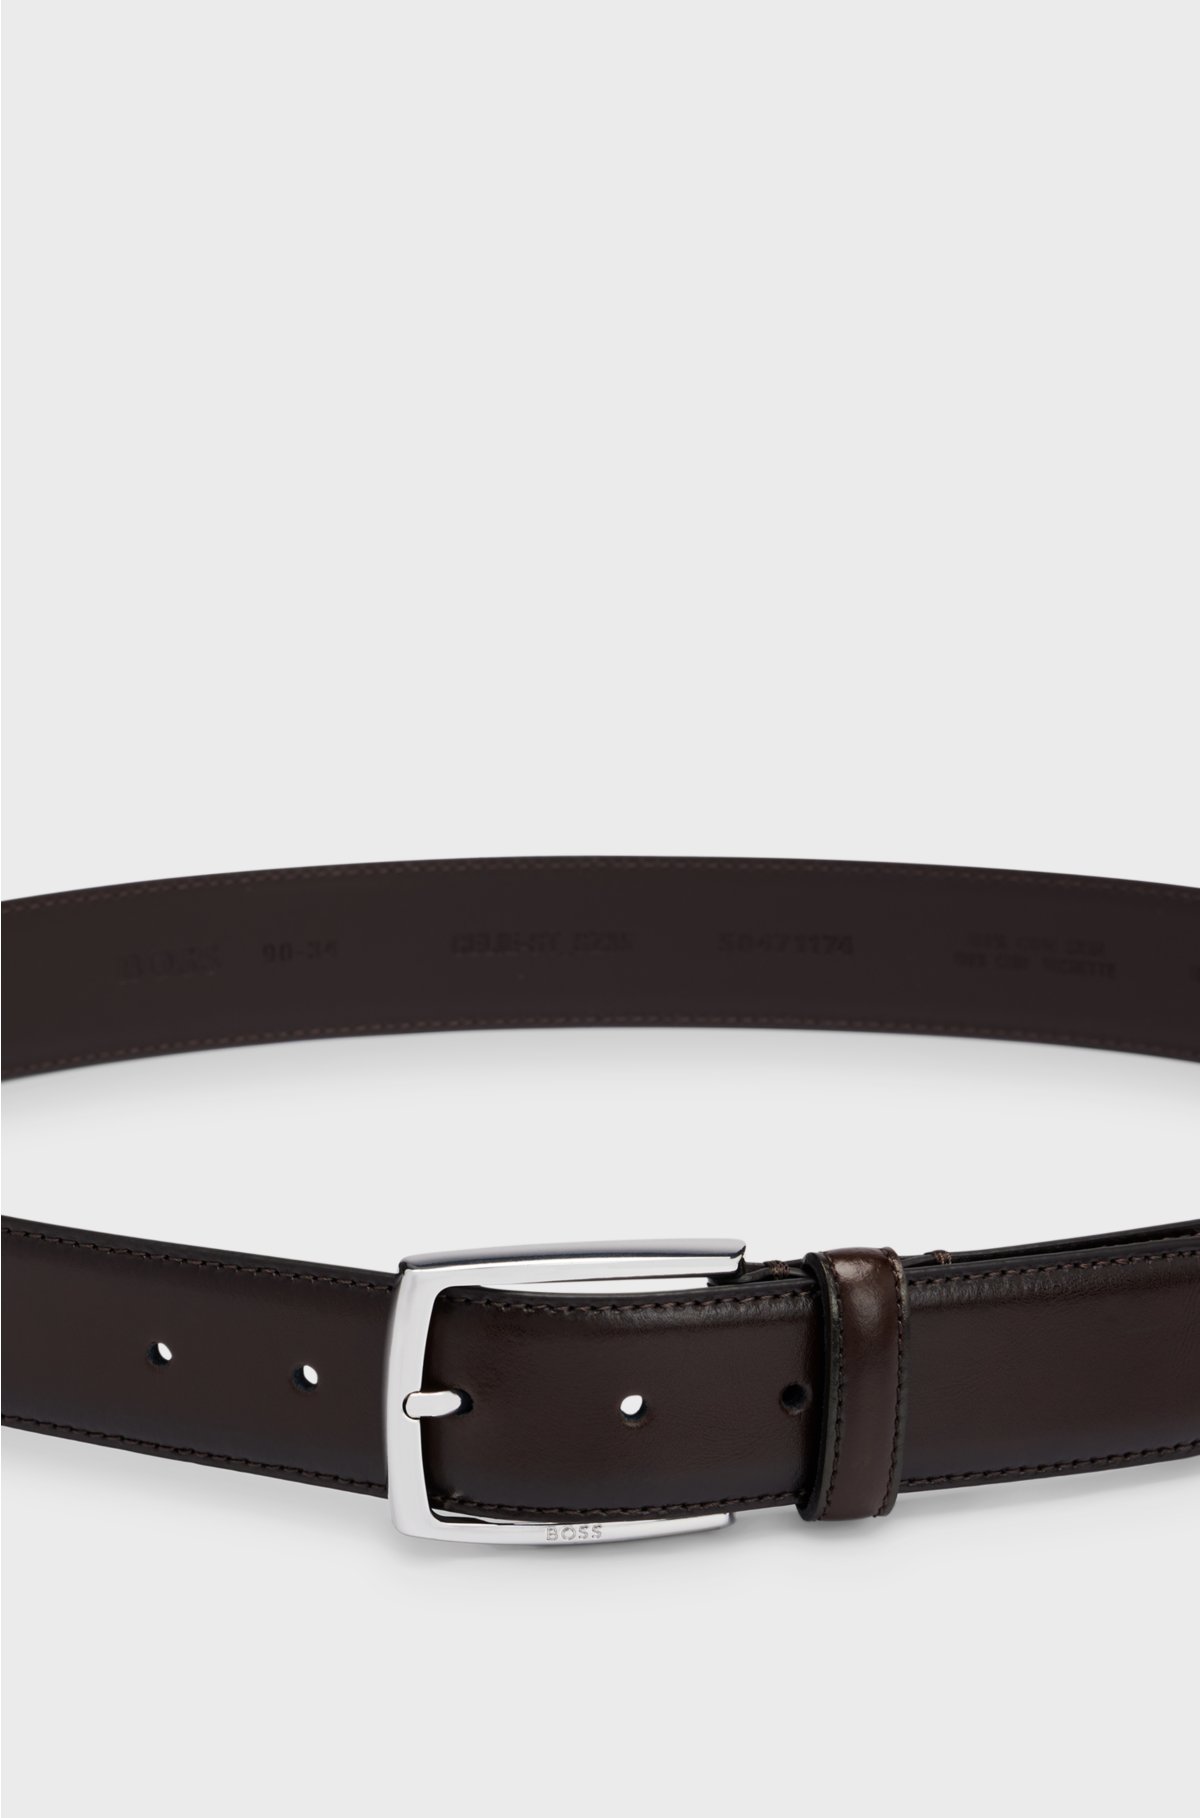 Italian-made polished-leather belt with stitching detail, Dark Brown